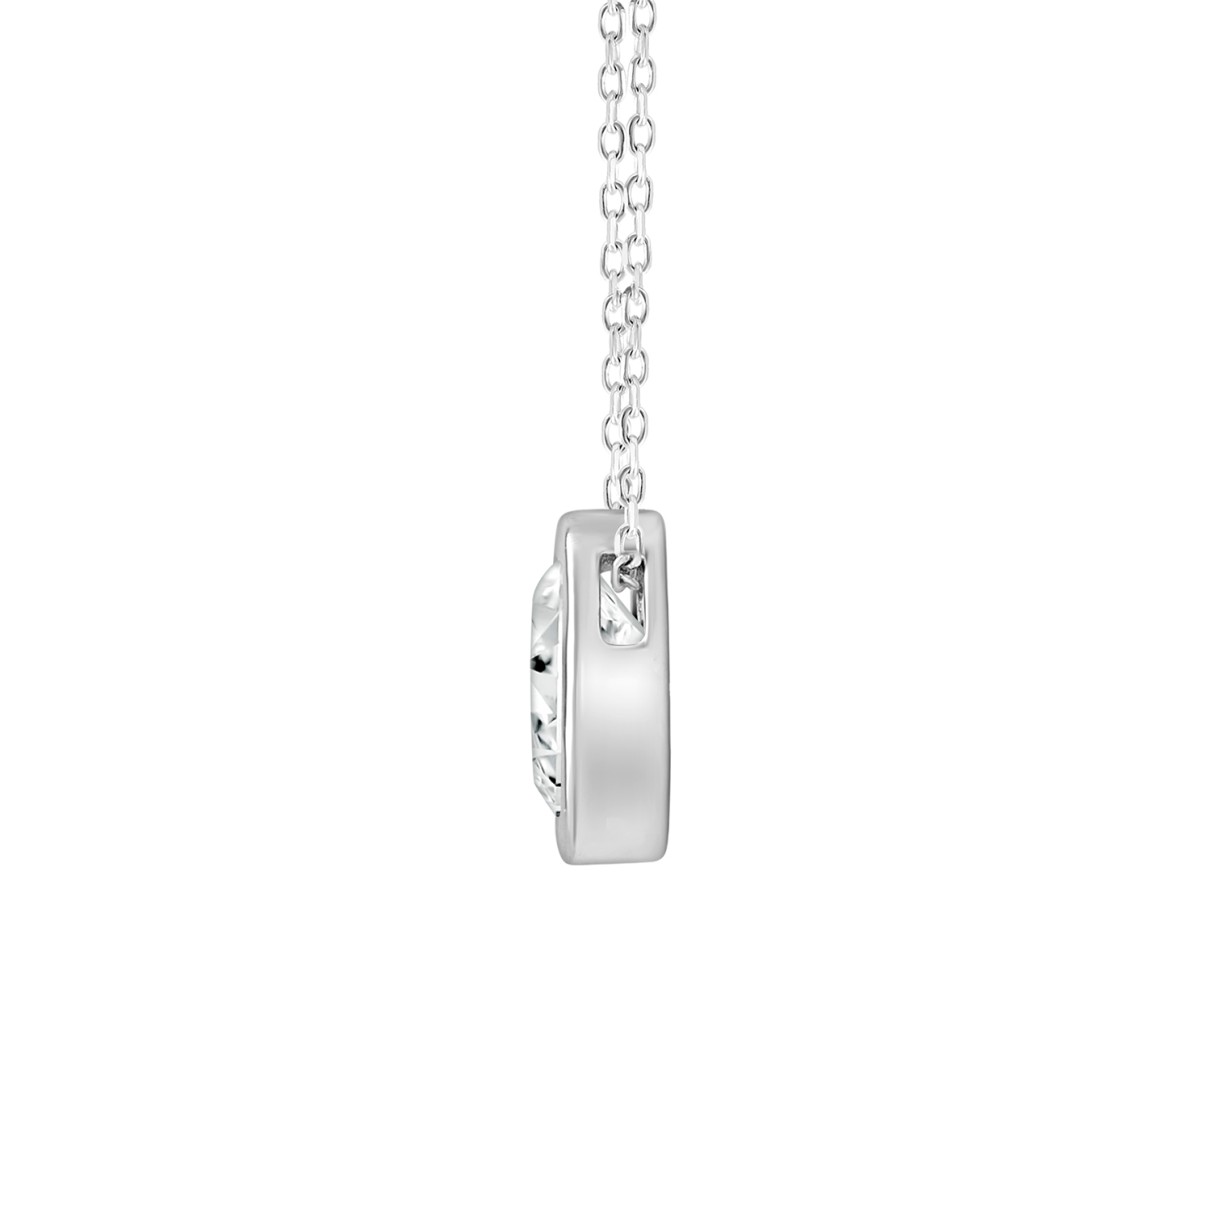 LADIES SOLITAIRE PENDANT 1CT OVAL DIAMOND 14K WHITE GOLD WITH CHAIN